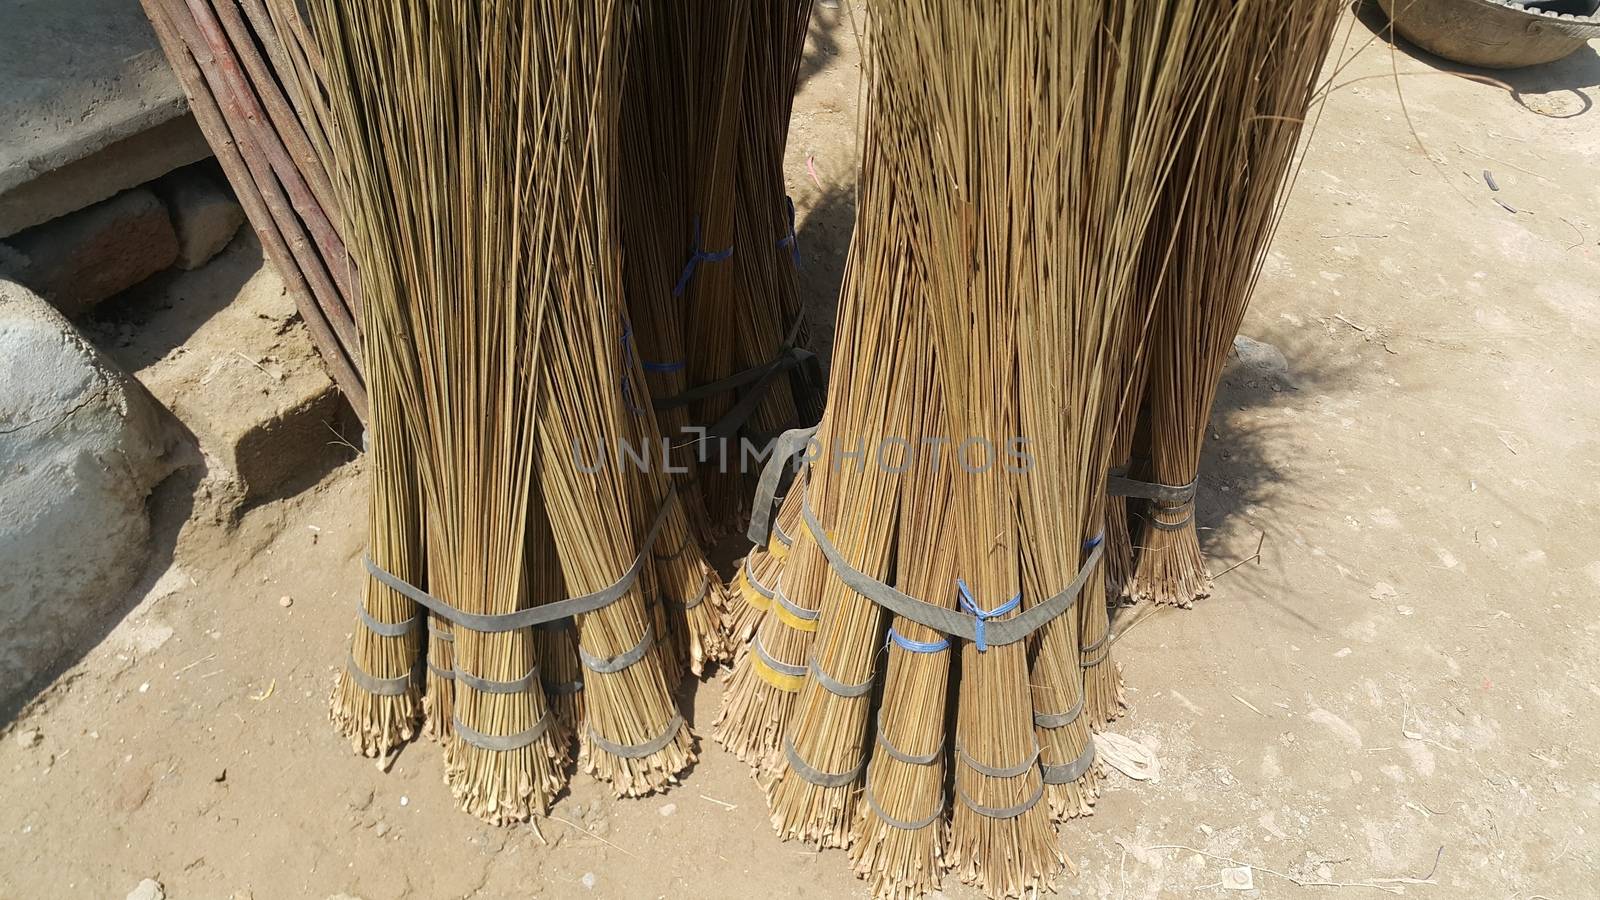 Old style broom used for housekeeping in rural area in Asian countries. by Photochowk